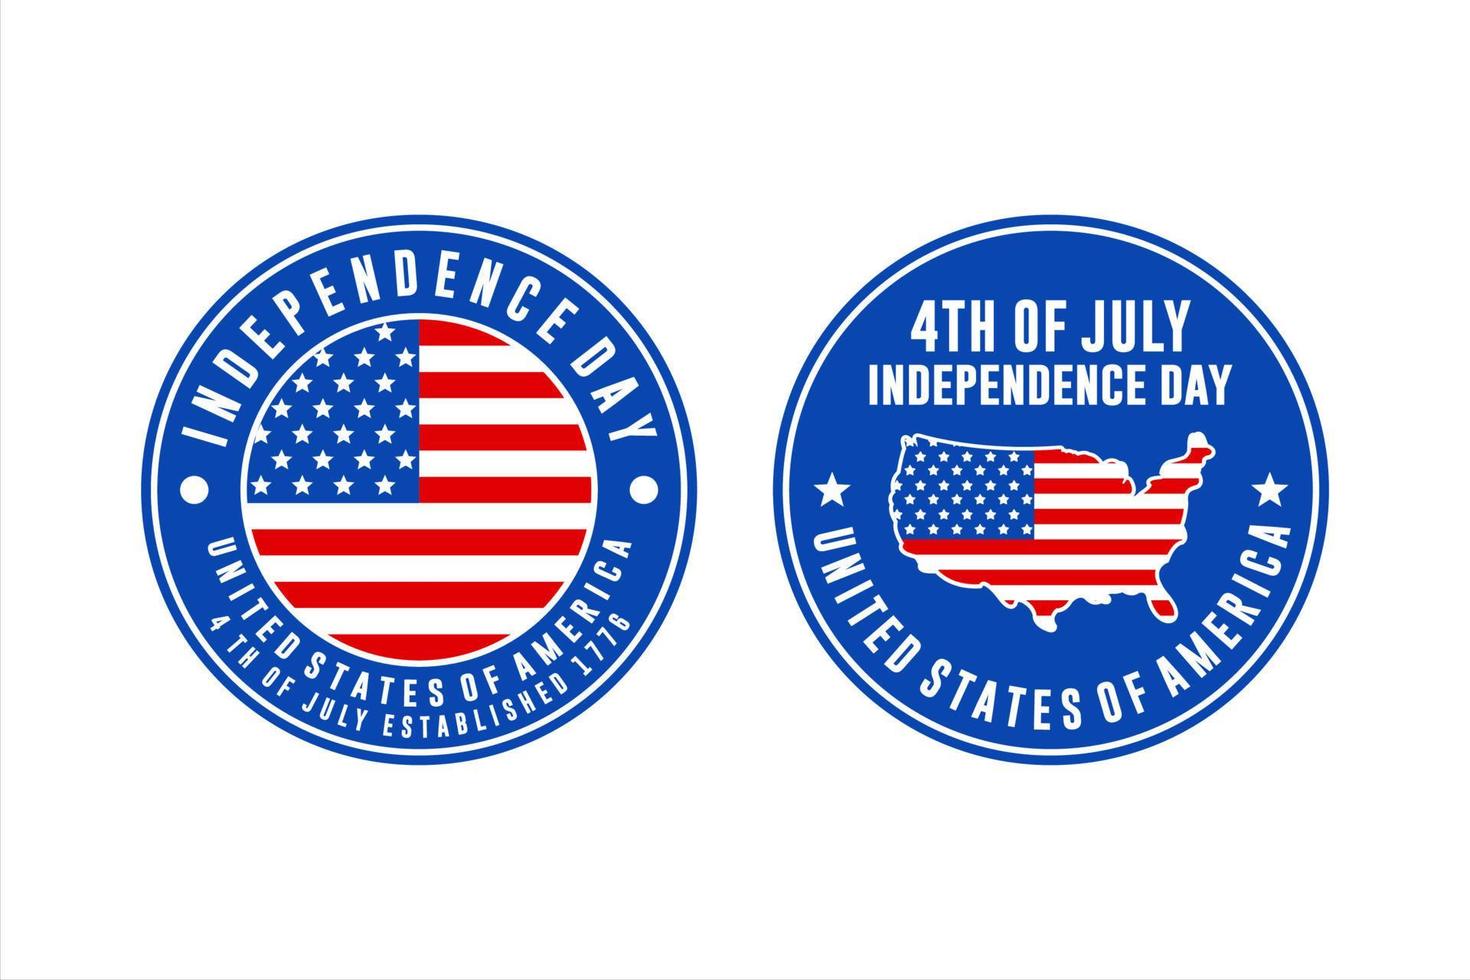 Independence Day 4 th July united states of america vector